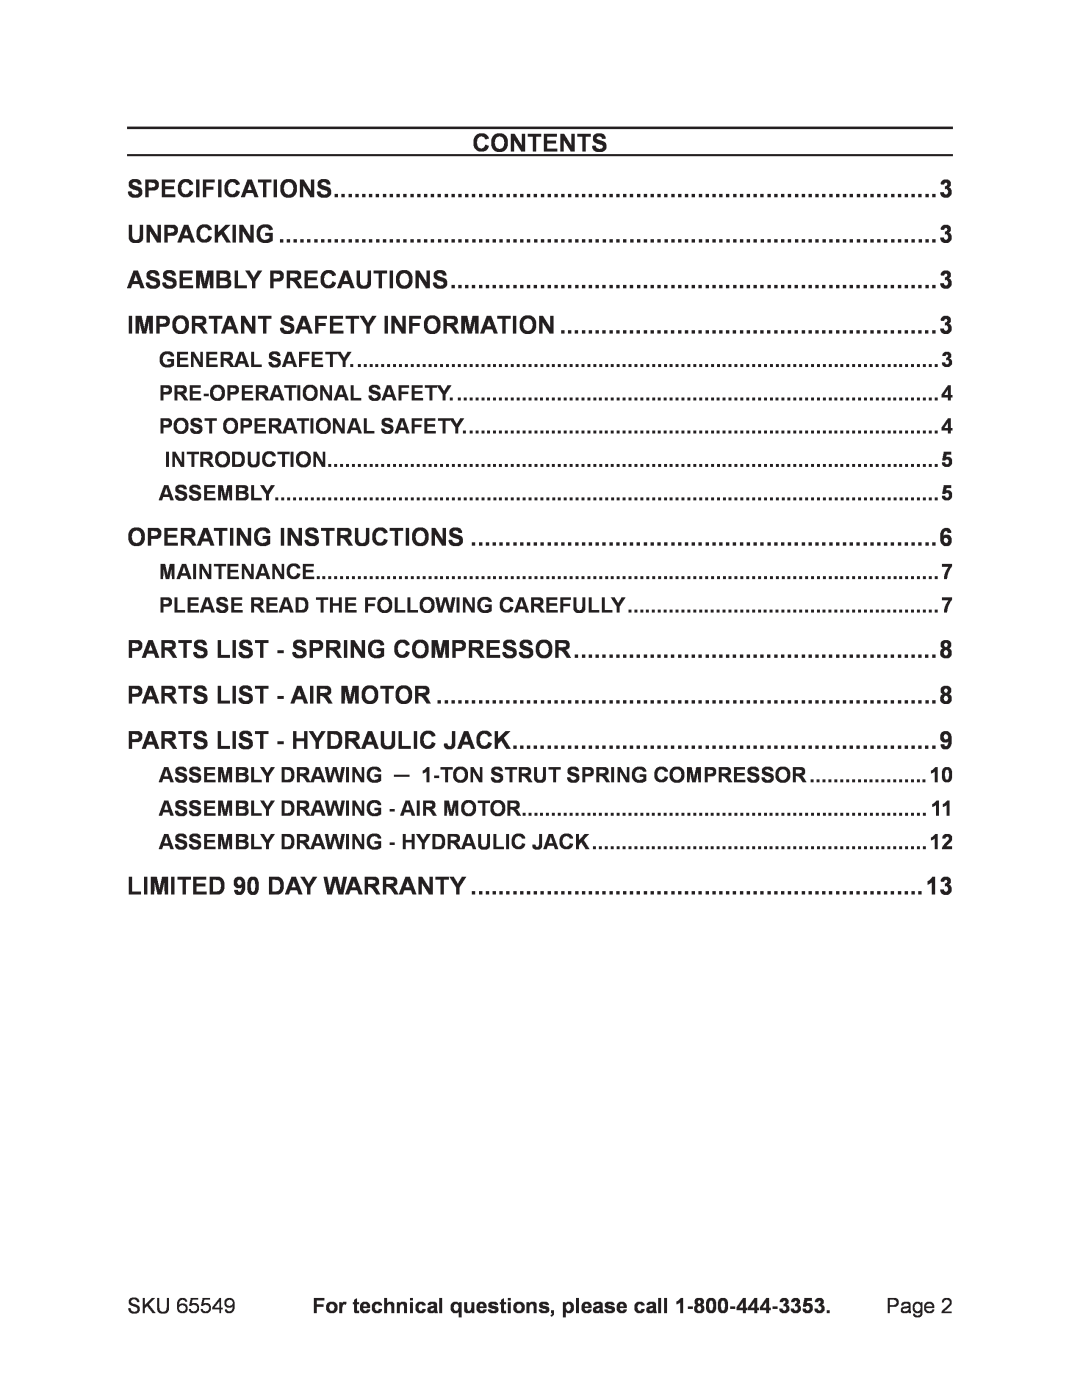 Harbor Freight Tools 65549 manual Contents 